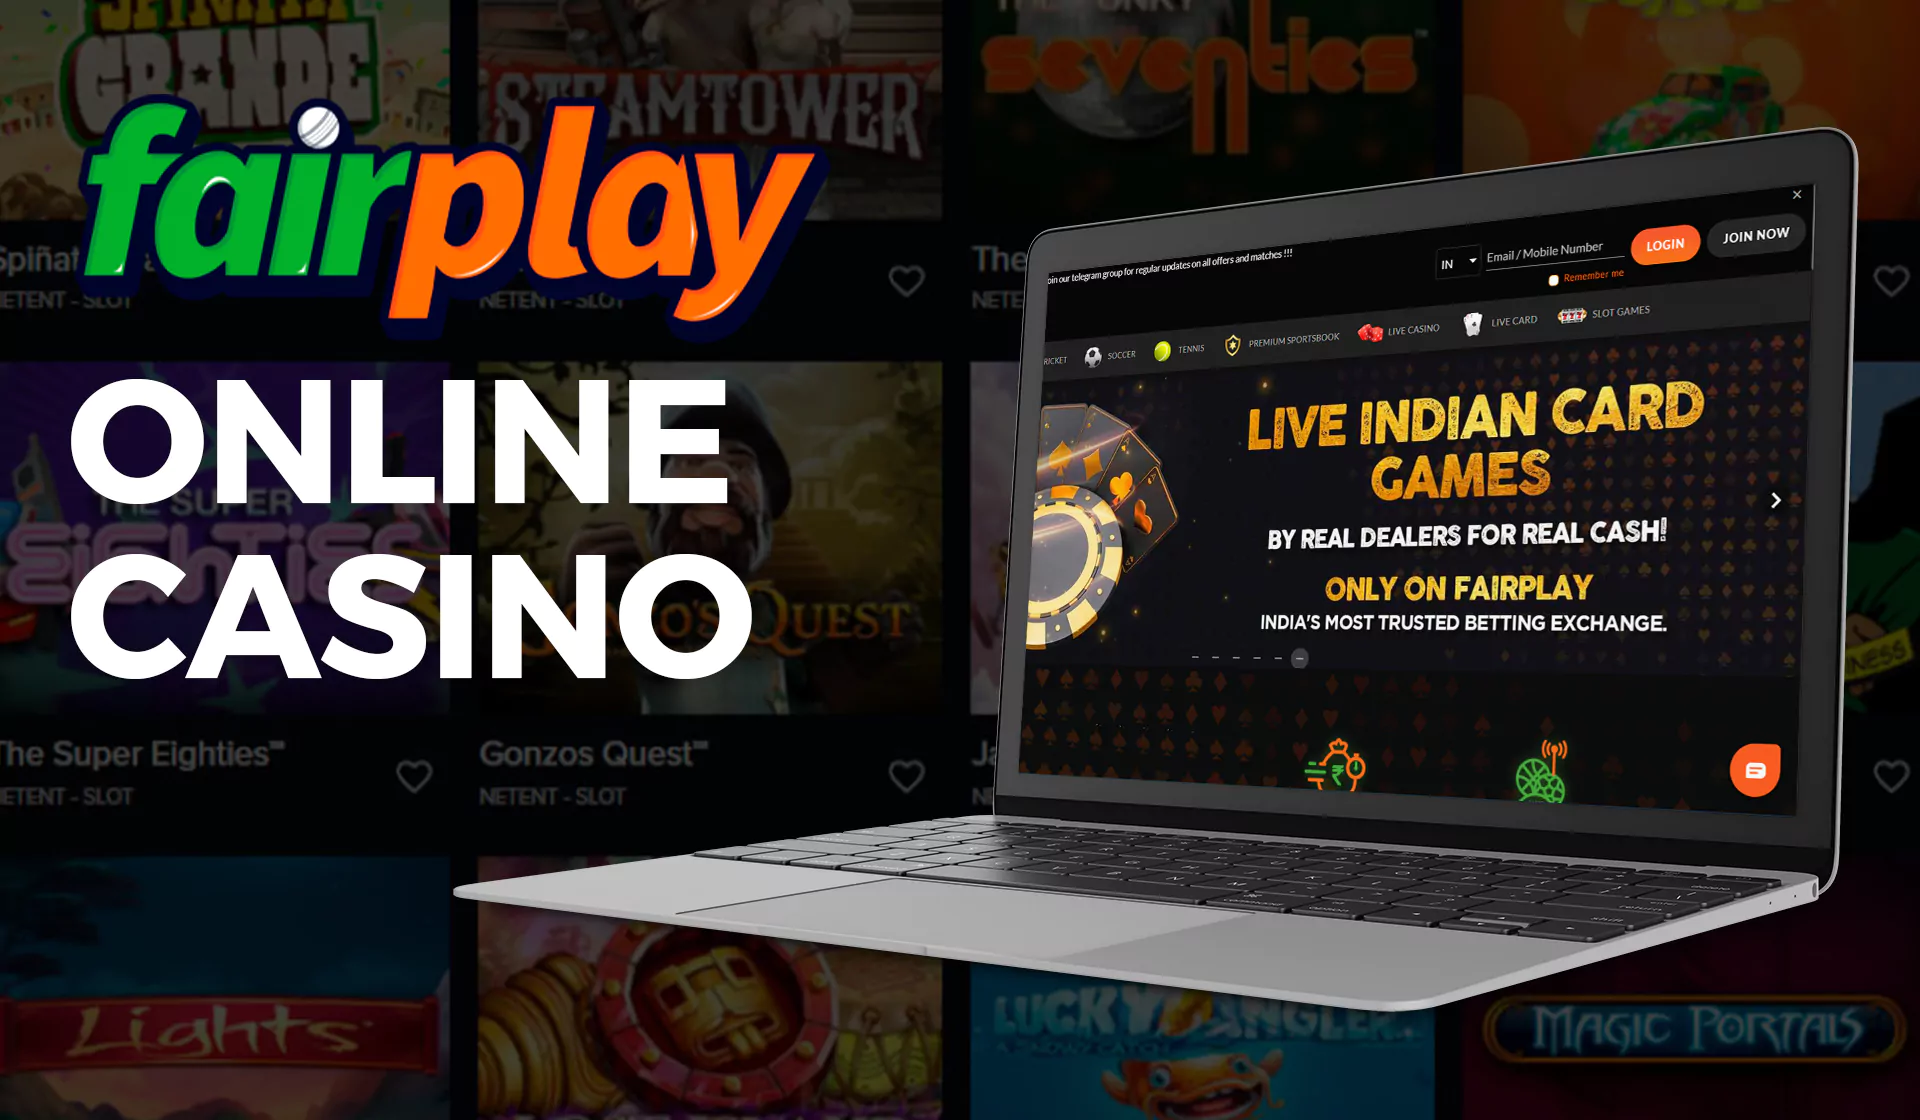 Fairplay is also an online casino.